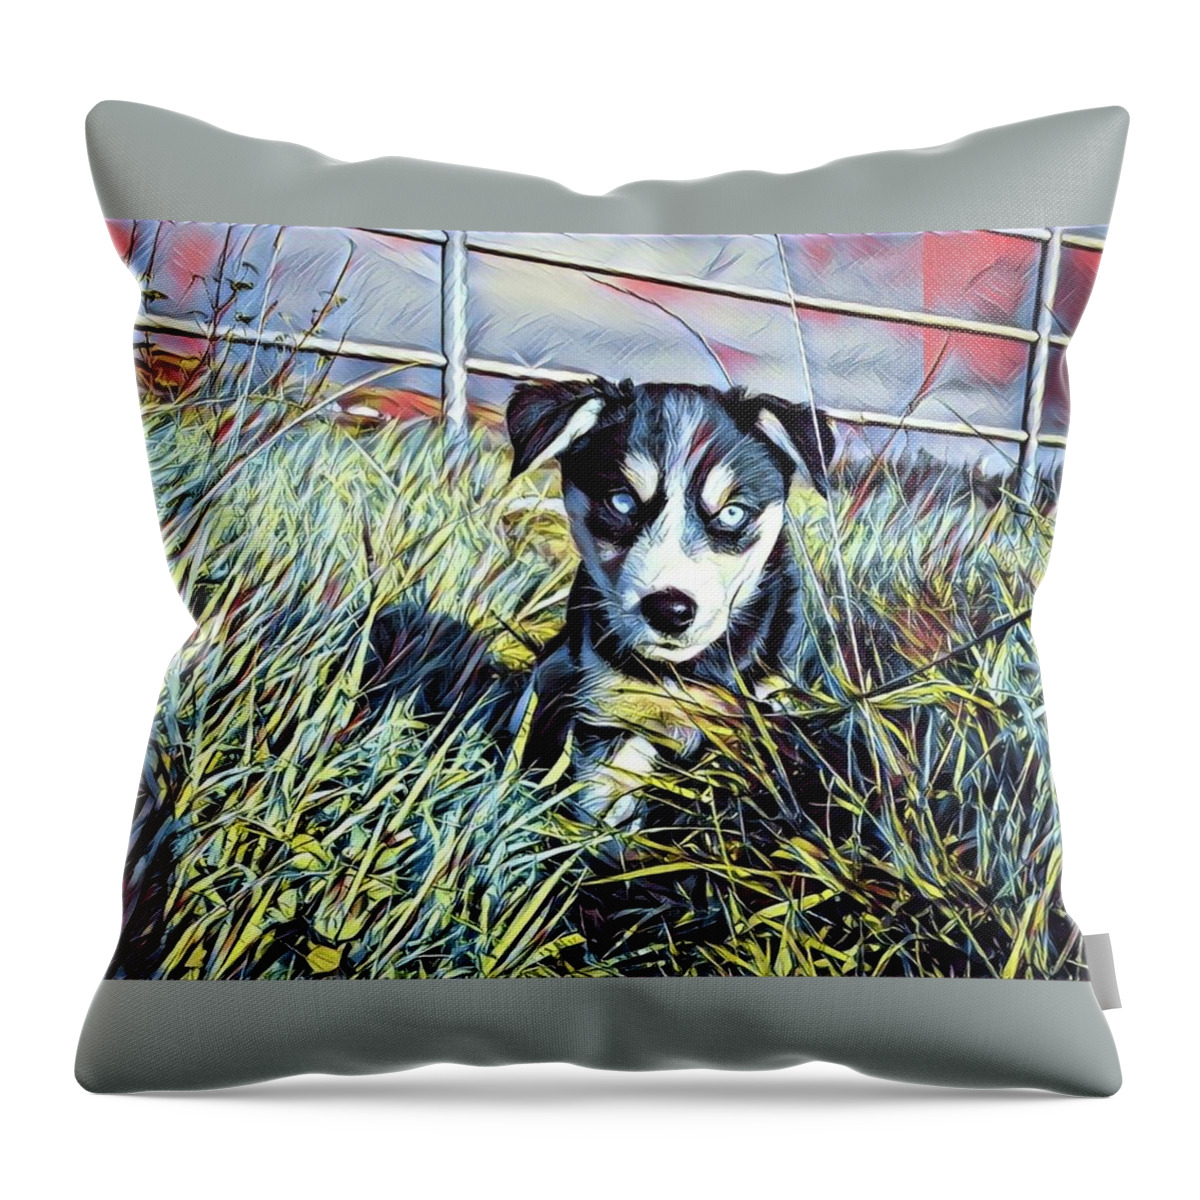 Puppy Throw Pillow featuring the photograph Puppy Eyes by Mark Callanan